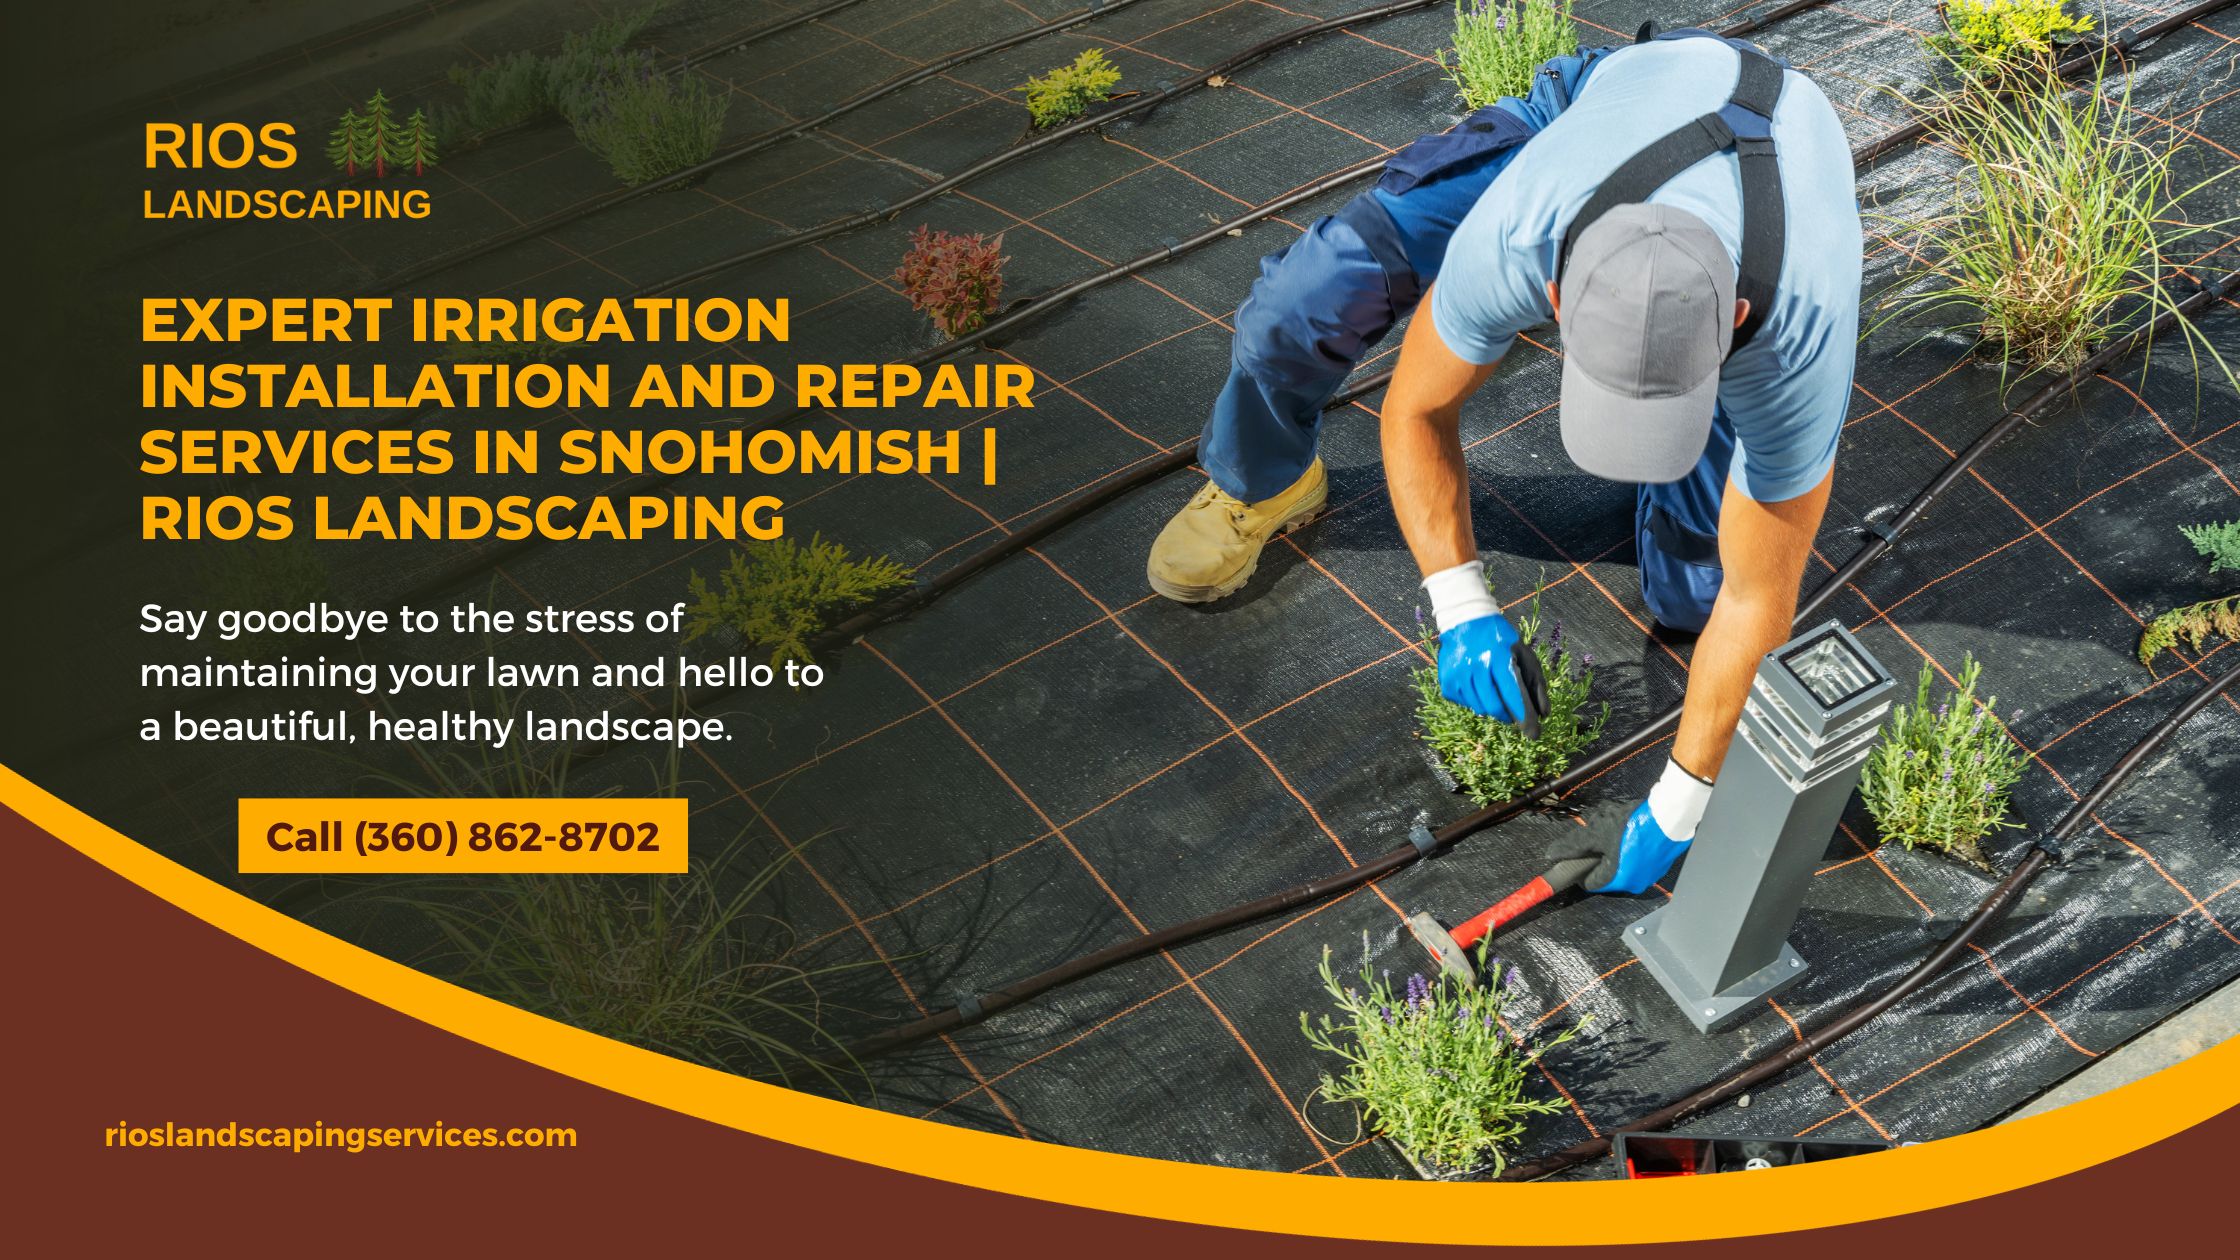 Expert Irrigation Installation and Repair Services in Snohomish | Rios Landscaping